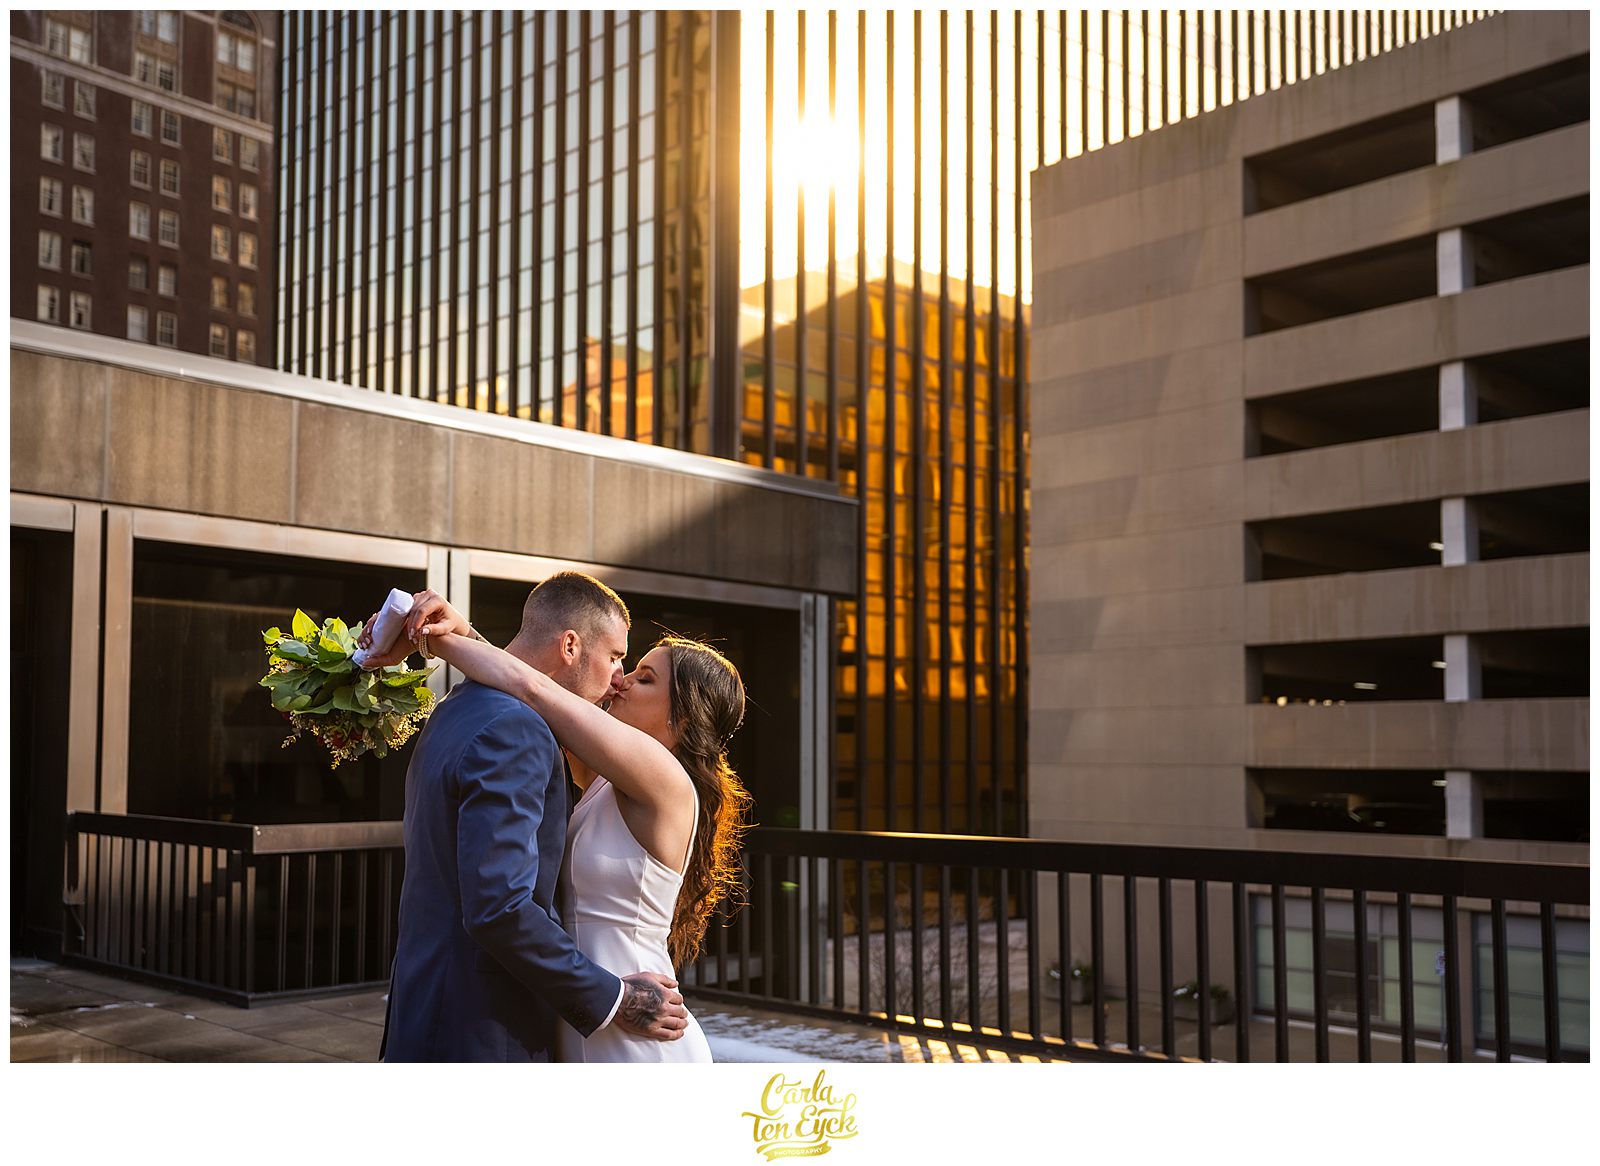 A bride and groom embrace during their spring Hartford elopement